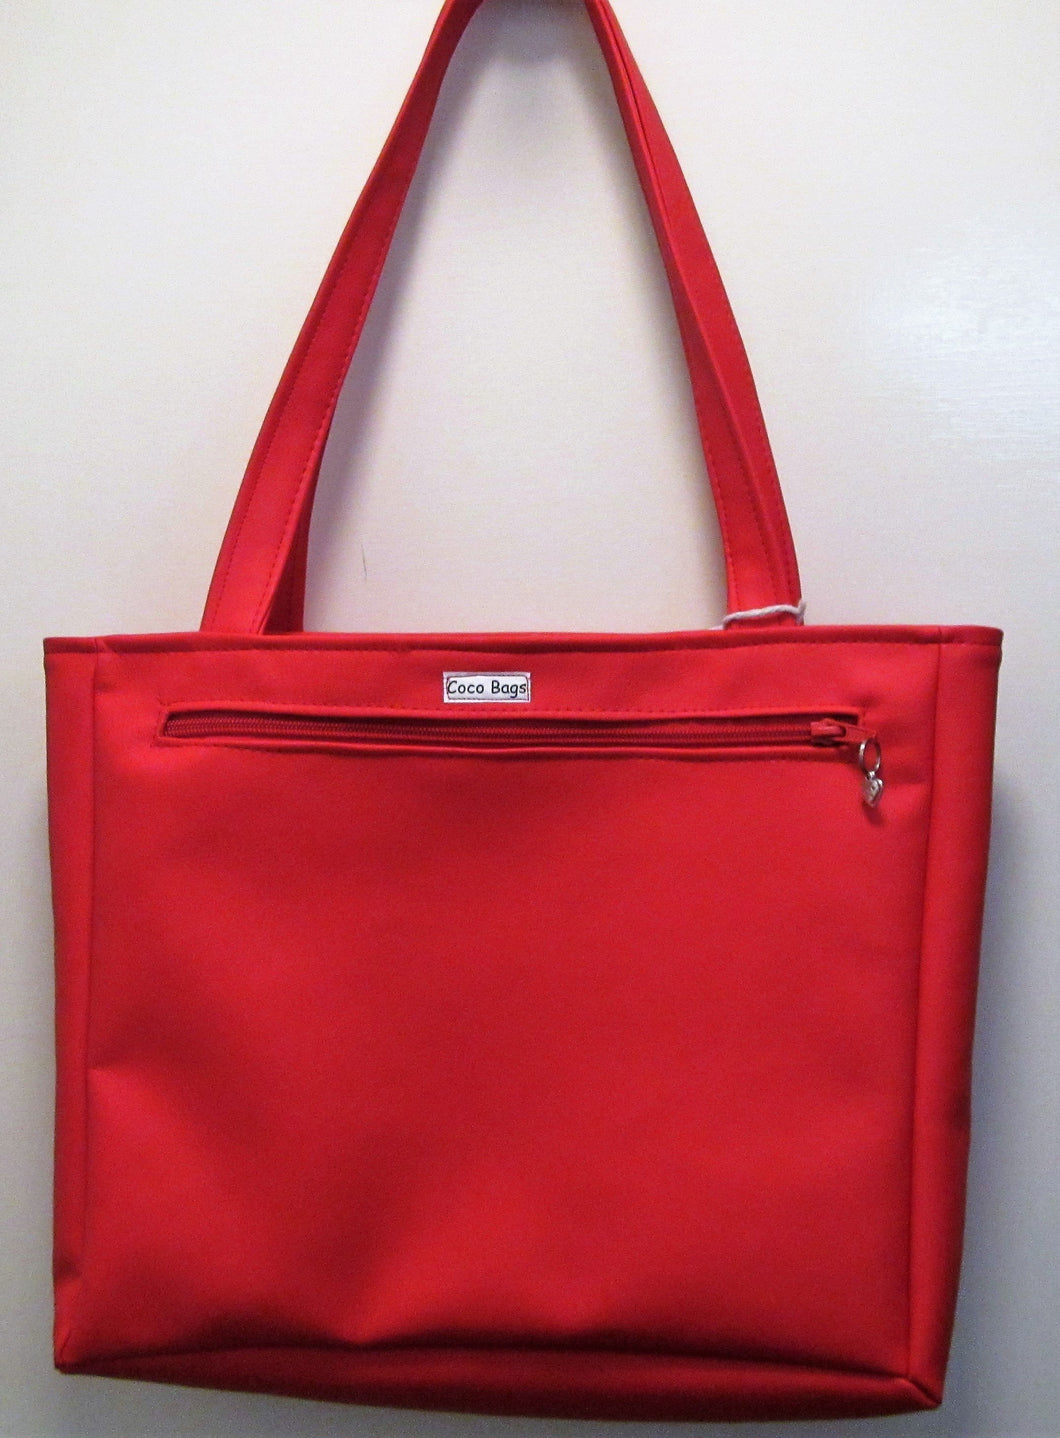 Beautiful handcrafted faux leather red handbag